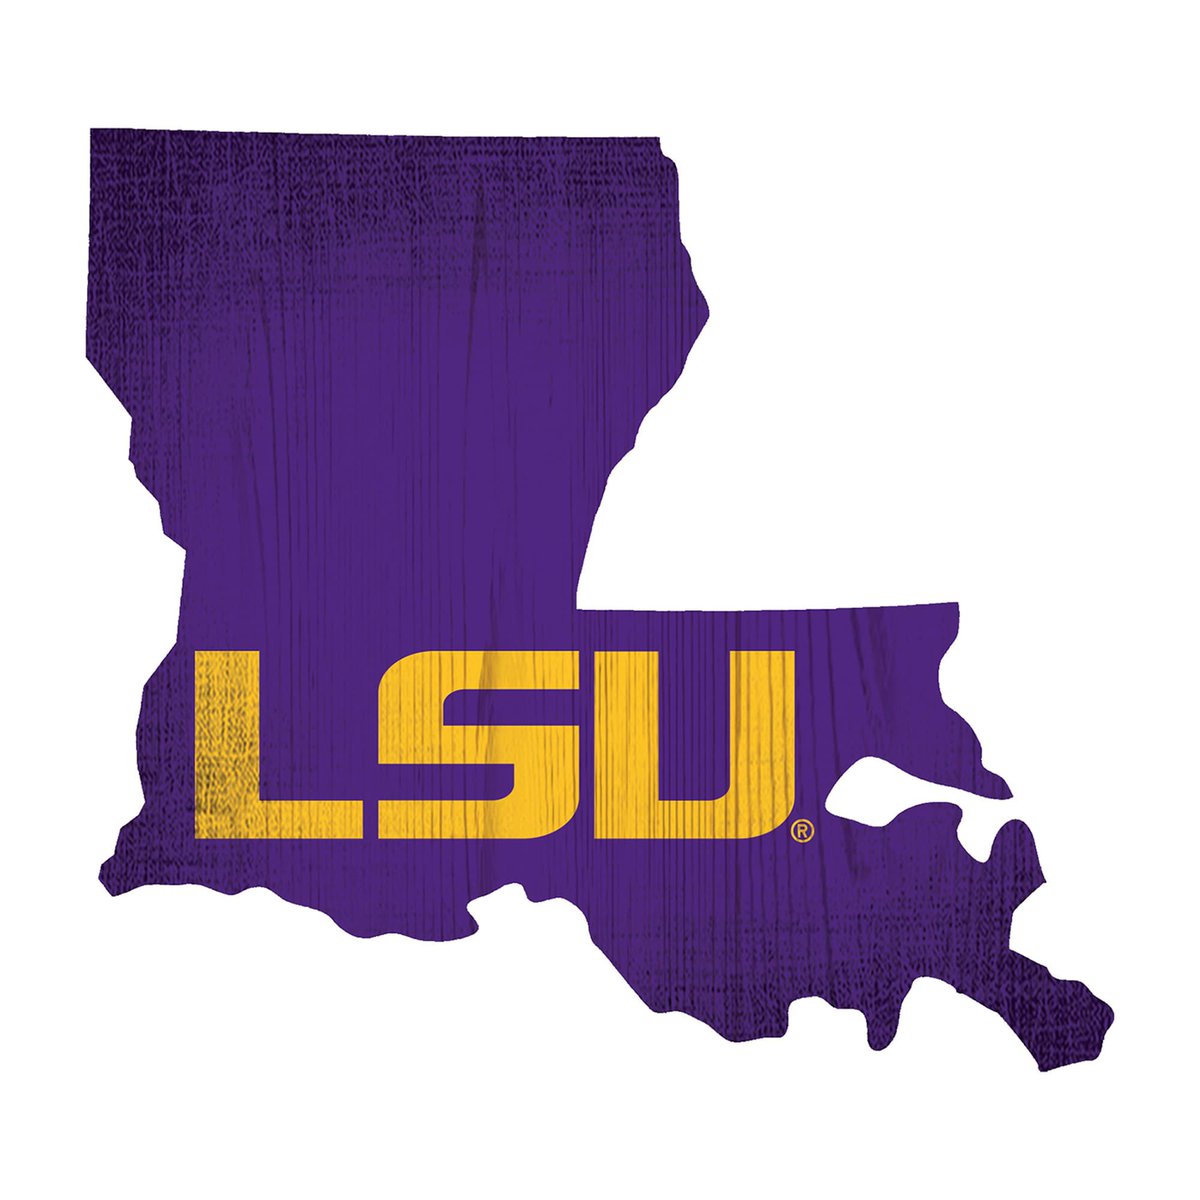 Blessed to announce my commitment to Louisiana State University to continue my baseball career! I want to thank the @BlinnBaseball coaching staff for everything they have done for me and my career! #GeauxTigers @LSUCoachJ @CoachJordan2 @DustyHart @WadeRegas21 @zacsenf